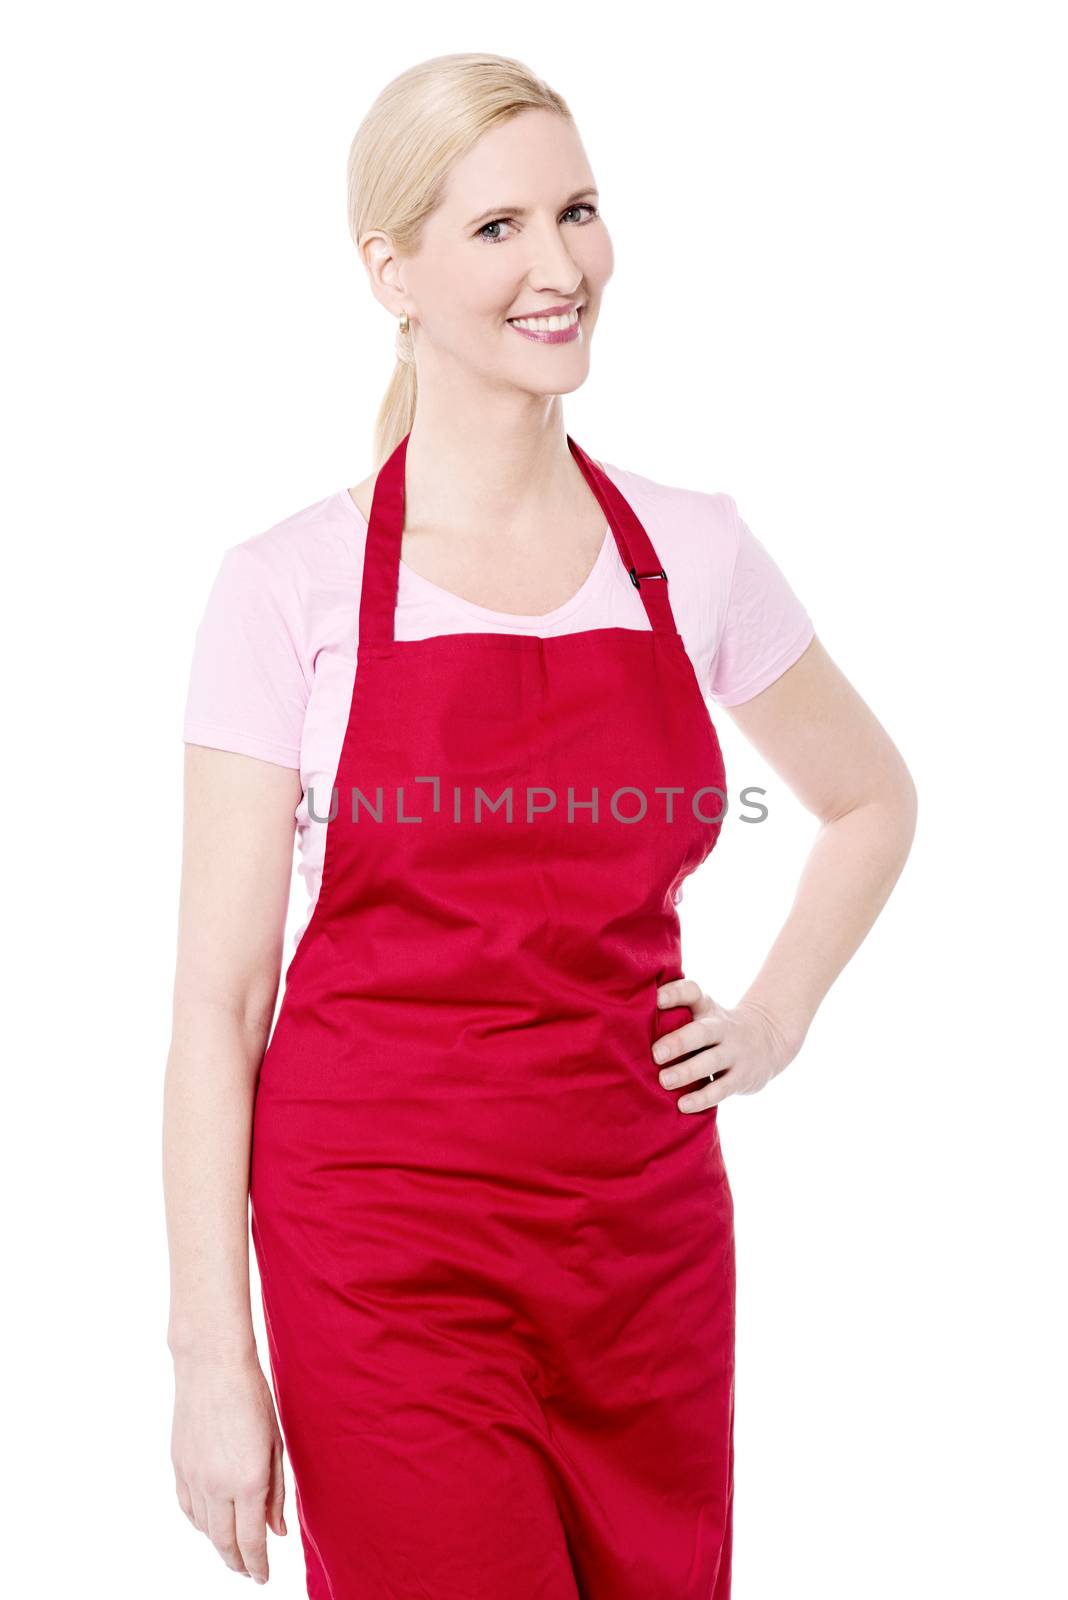 Casual pose of female chef  by stockyimages